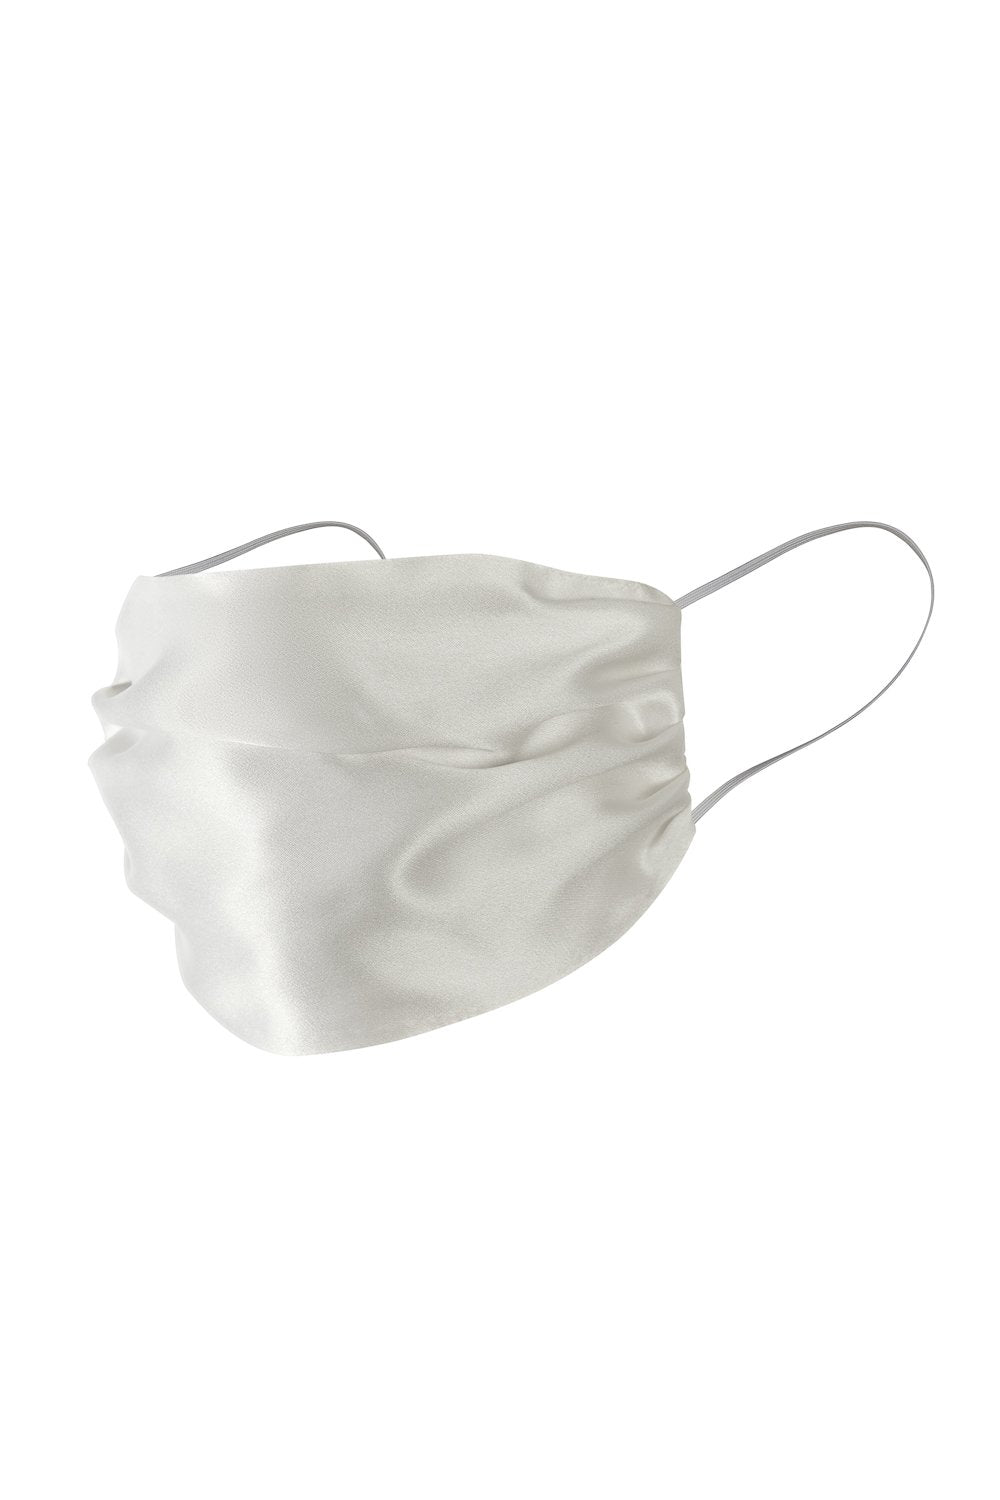 Silk Face Mask in Ivory